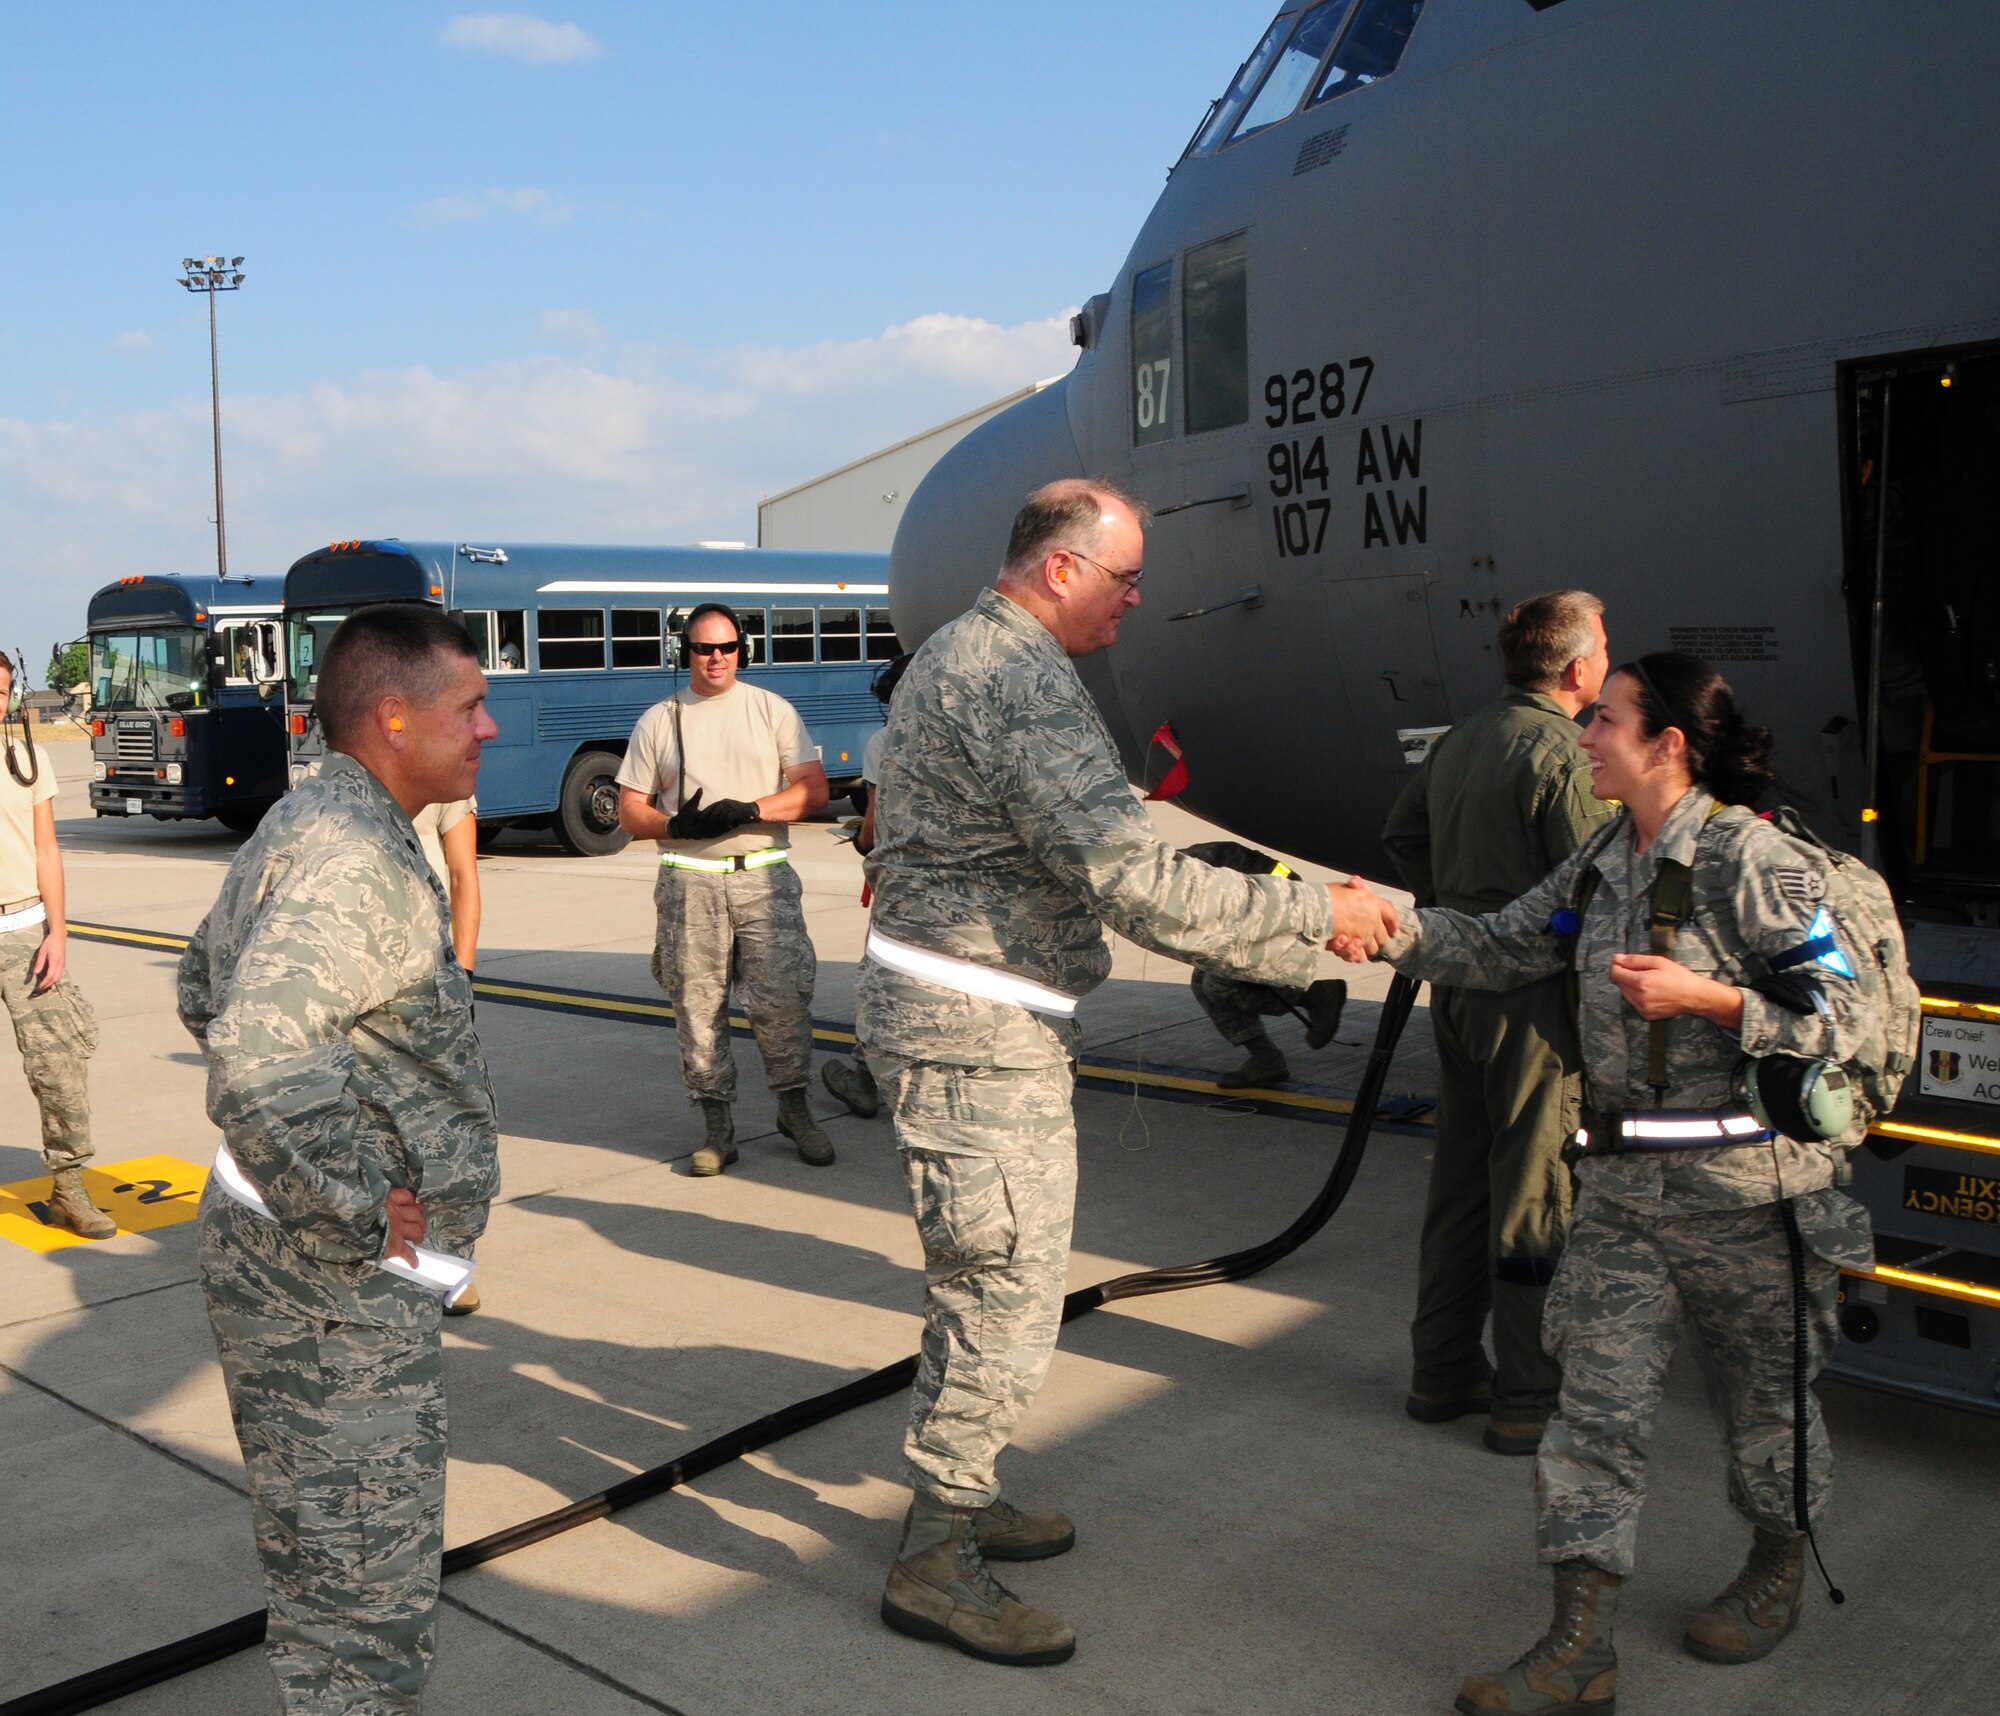 On July 24, 2012 It is all smiles as members from the 107th and 914th Airlift Wings return home. Both units deployed to Alpena, Michigan for thier Operational Readiness Inspection (ORI). Staff Sgt. Chelsey Berg 107th C-130 Aircraft Mechanic is greeted by Col. Timothy Vaughan, 107th Mission Support Group Commander and Lt. Col. Donald McGuire 107th Mission Support Group Deputy Commander. (U.S. Air Force Photo/SMSgt Ray Lloyd)